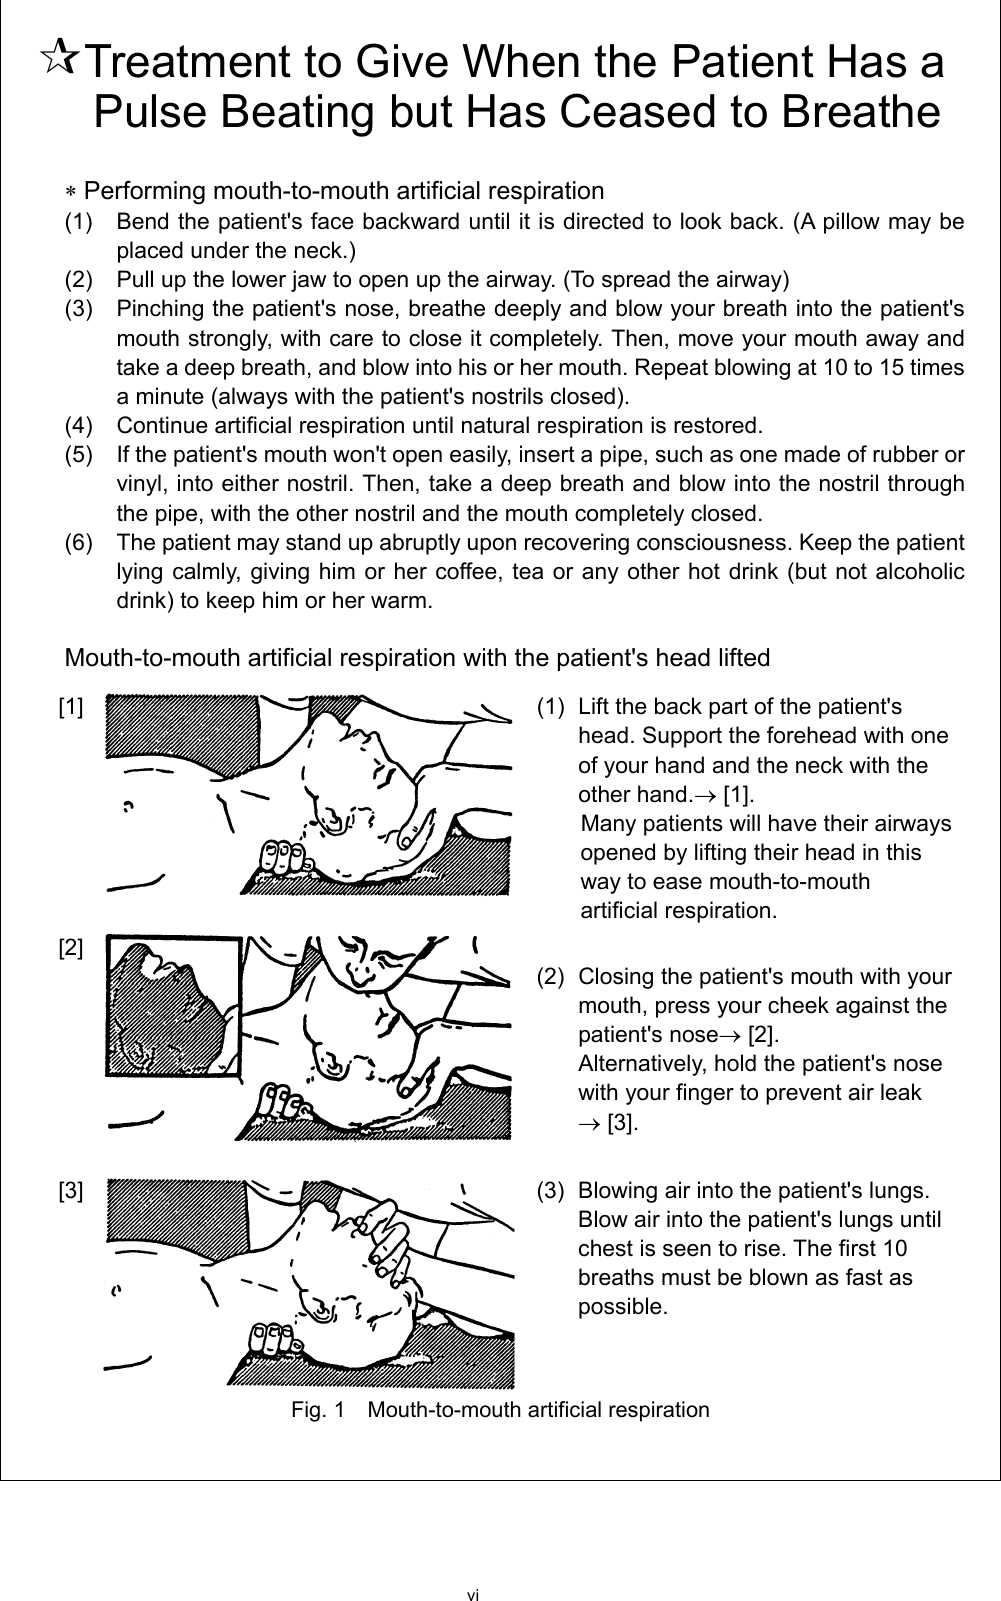 vi  Treatment to Give When the Patient Has a Pulse Beating but Has Ceased to Breathe  ∗ Performing mouth-to-mouth artificial respiration (1)    Bend the patient&apos;s face backward until it is directed to look back. (A pillow may be placed under the neck.)   (2)    Pull up the lower jaw to open up the airway. (To spread the airway)   (3)    Pinching the patient&apos;s nose, breathe deeply and blow your breath into the patient&apos;s mouth strongly, with care to close it completely. Then, move your mouth away and take a deep breath, and blow into his or her mouth. Repeat blowing at 10 to 15 times a minute (always with the patient&apos;s nostrils closed).   (4)    Continue artificial respiration until natural respiration is restored.   (5)    If the patient&apos;s mouth won&apos;t open easily, insert a pipe, such as one made of rubber or vinyl, into either nostril. Then, take a deep breath and blow into the nostril through the pipe, with the other nostril and the mouth completely closed.   (6)    The patient may stand up abruptly upon recovering consciousness. Keep the patient lying calmly, giving him or her coffee, tea or any other hot drink (but not alcoholic drink) to keep him or her warm.    Mouth-to-mouth artificial respiration with the patient&apos;s head lifted [1]   (1)  Lift the back part of the patient&apos;s head. Support the forehead with one of your hand and the neck with the other hand.→ [1].   Many patients will have their airways opened by lifting their head in this way to ease mouth-to-mouth artificial respiration.   [2]    (2) Closing the patient&apos;s mouth with your mouth, press your cheek against the patient&apos;s nose→ [2]. Alternatively, hold the patient&apos;s nose with your finger to prevent air leak   → [3].   [3]  (3)  Blowing air into the patient&apos;s lungs. Blow air into the patient&apos;s lungs until chest is seen to rise. The first 10 breaths must be blown as fast as possible.   Fig. 1    Mouth-to-mouth artificial respiration     